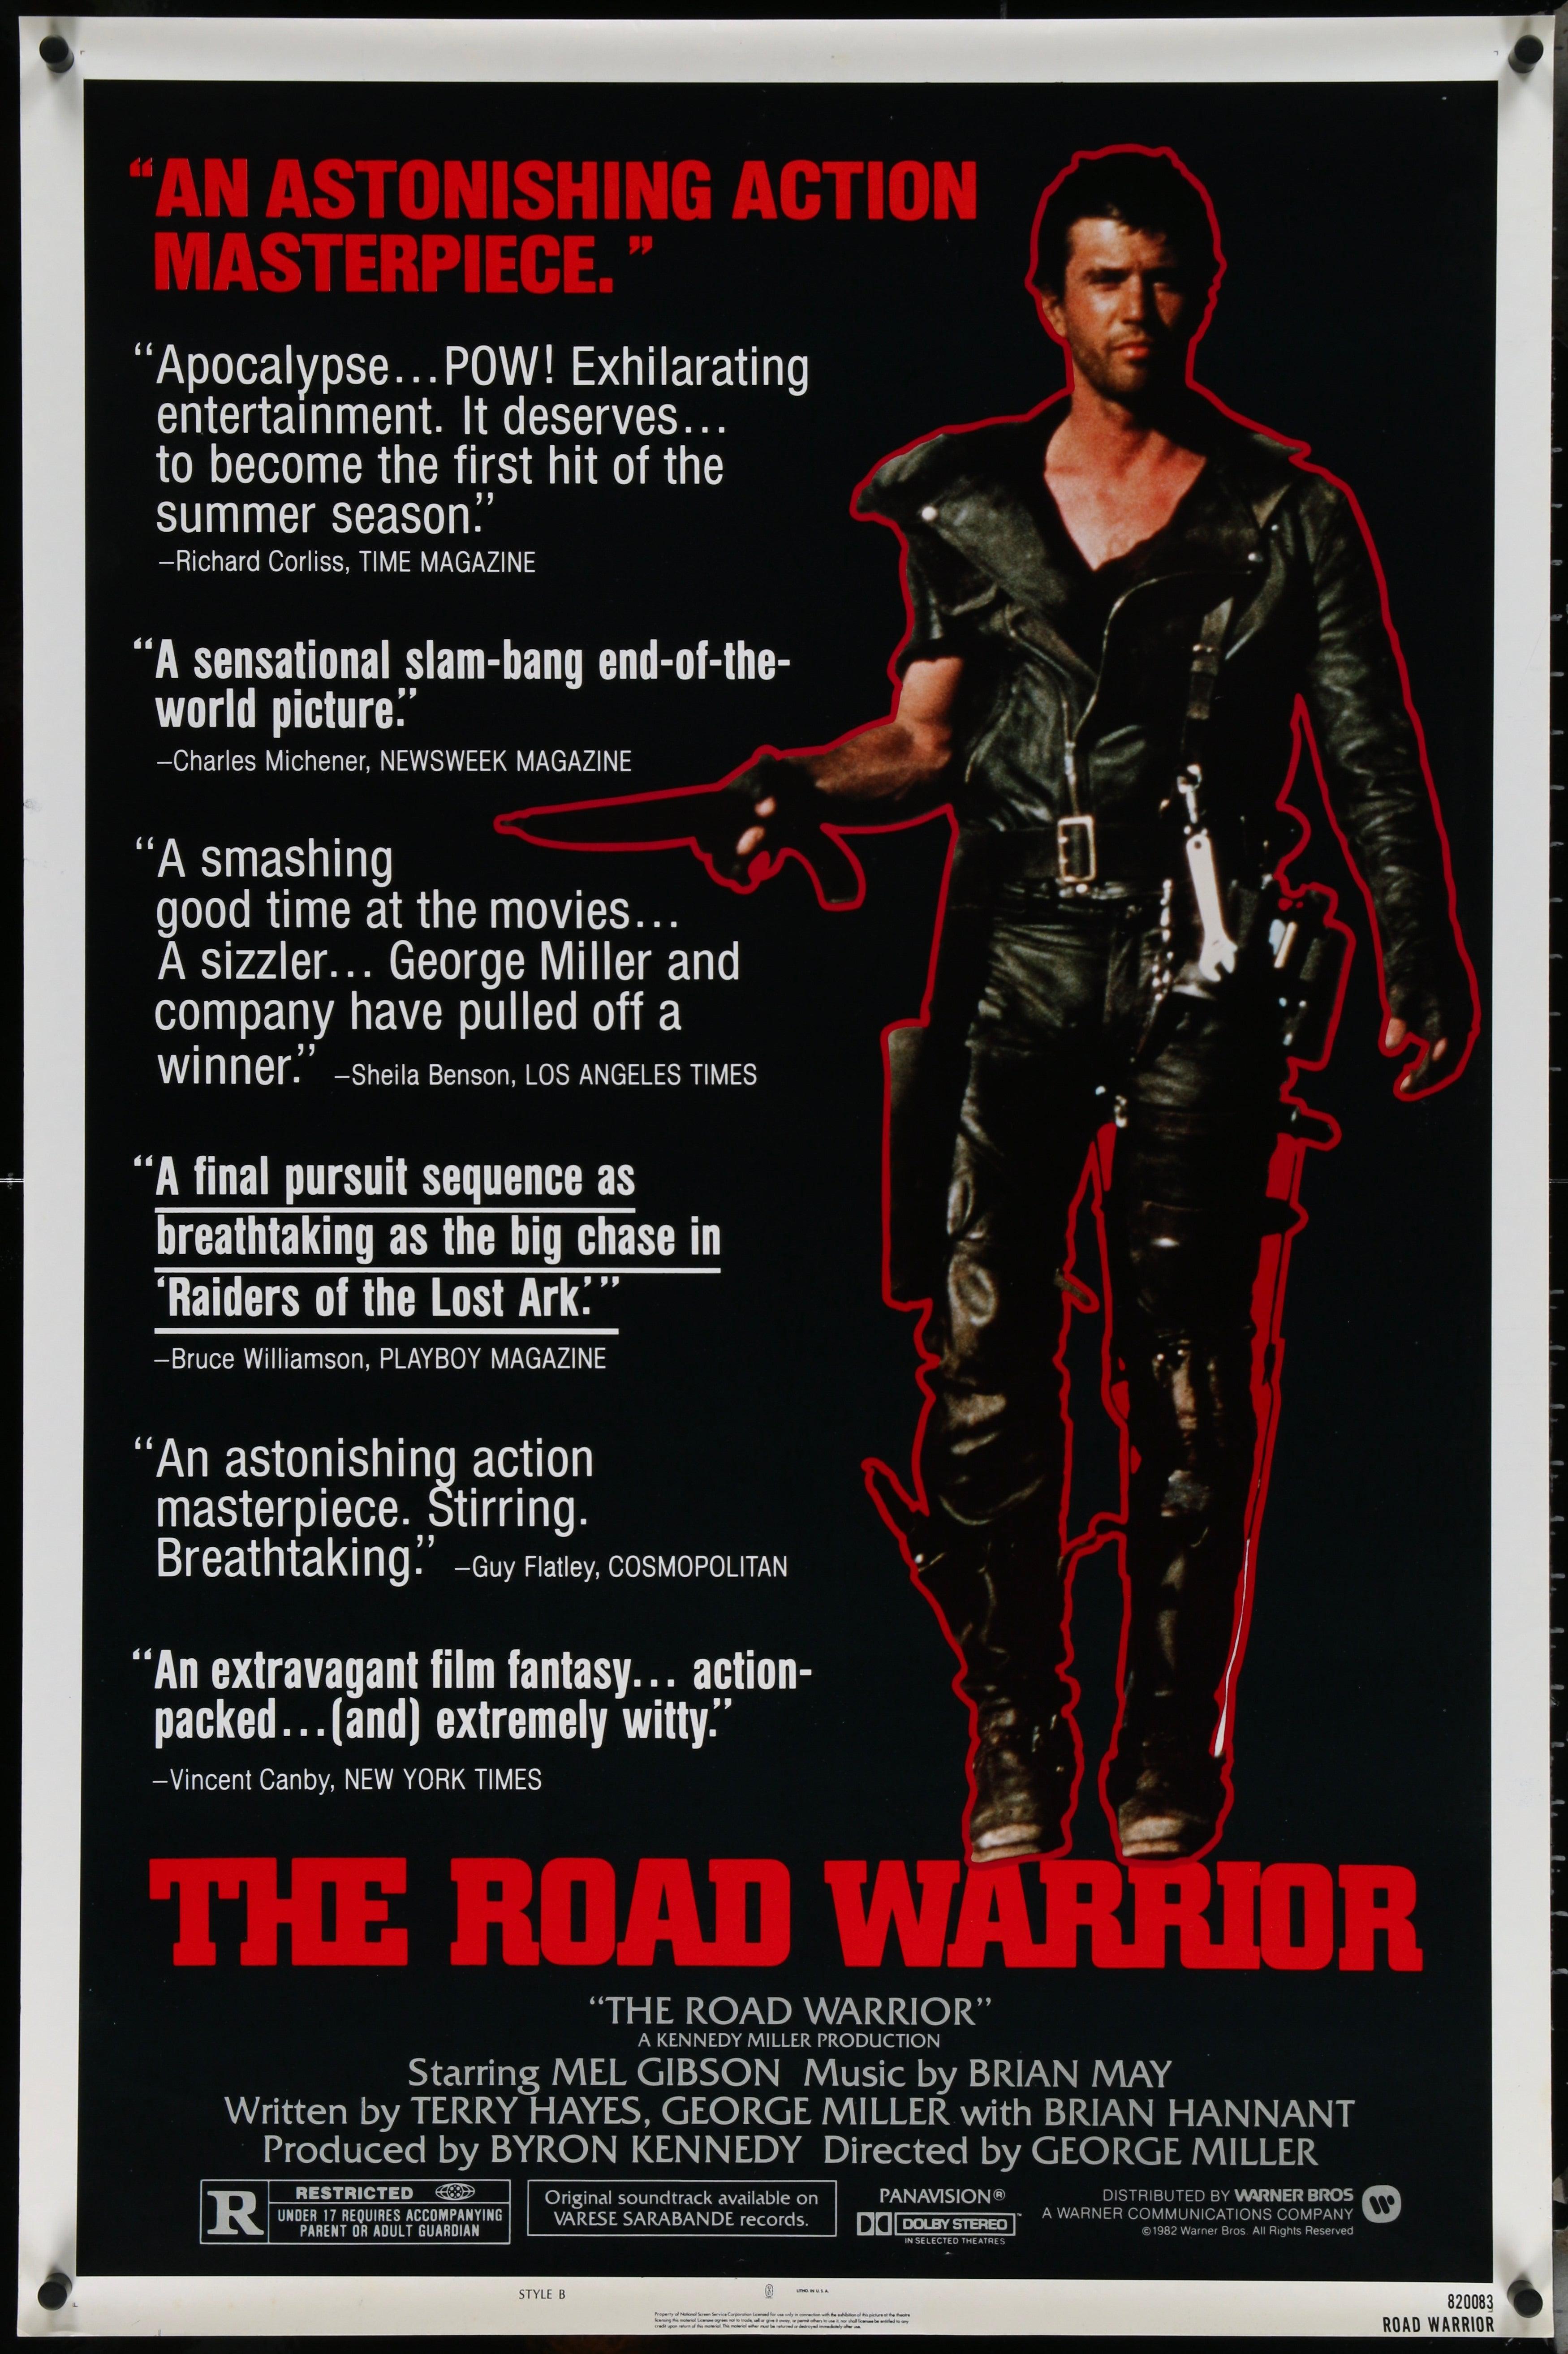 The Road Warrior Movie Poster 1982 1 Sheet (27x41)